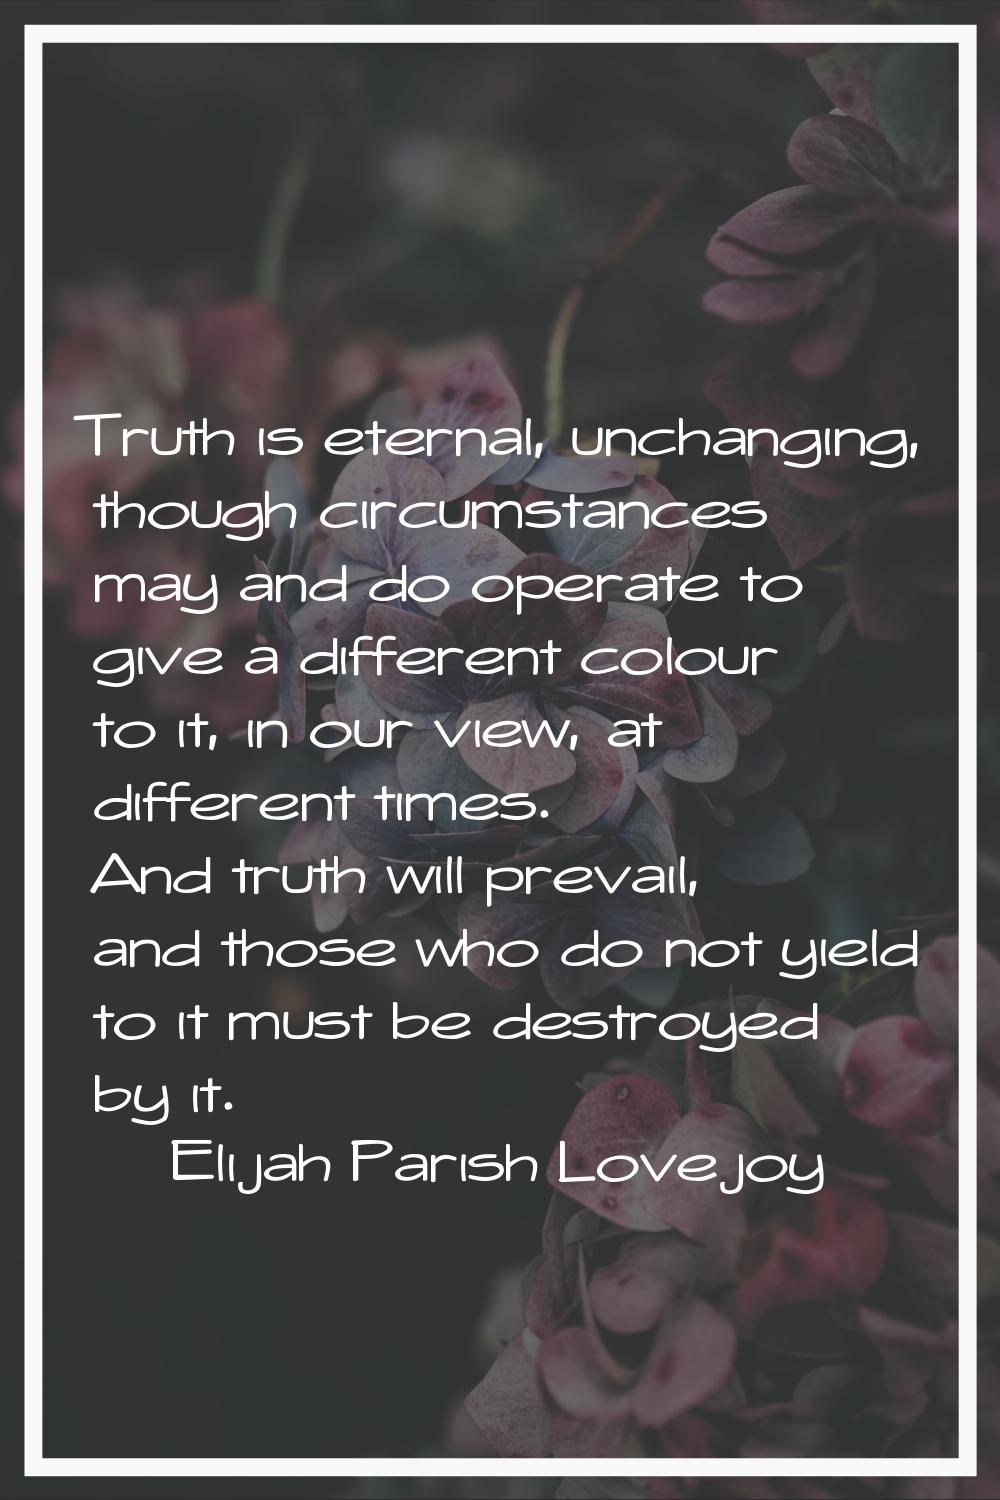 Truth is eternal, unchanging, though circumstances may and do operate to give a different colour to